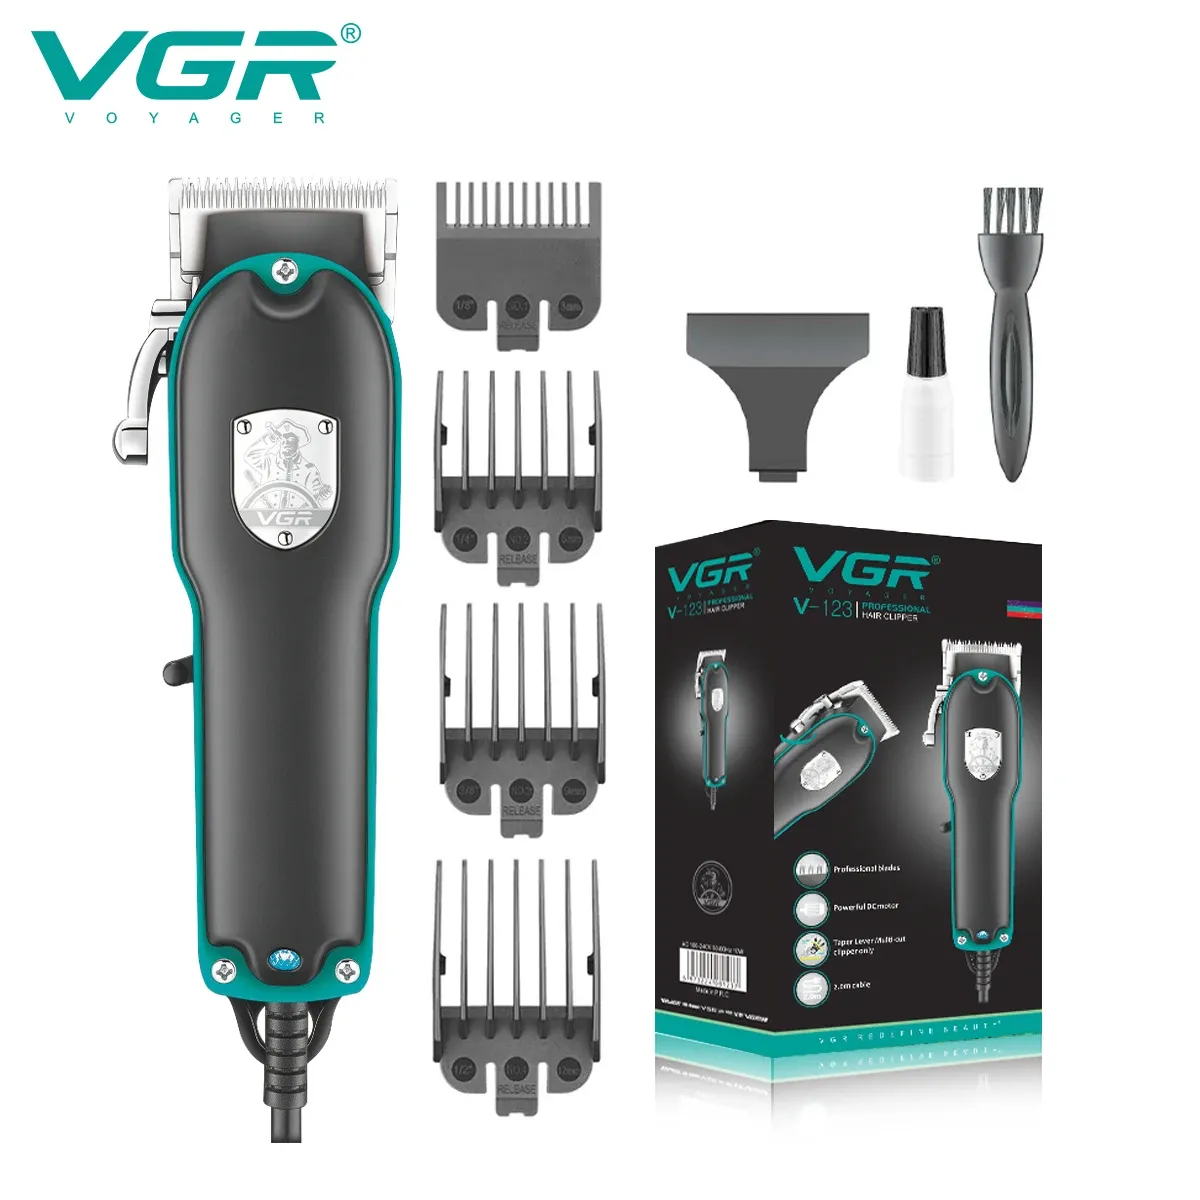 Trimmer Vgr Hair Clipper Hair Adjustable Trimmer Electric Zero Cutting Hine Professional Wired High Power Barber Hair Clipper V123